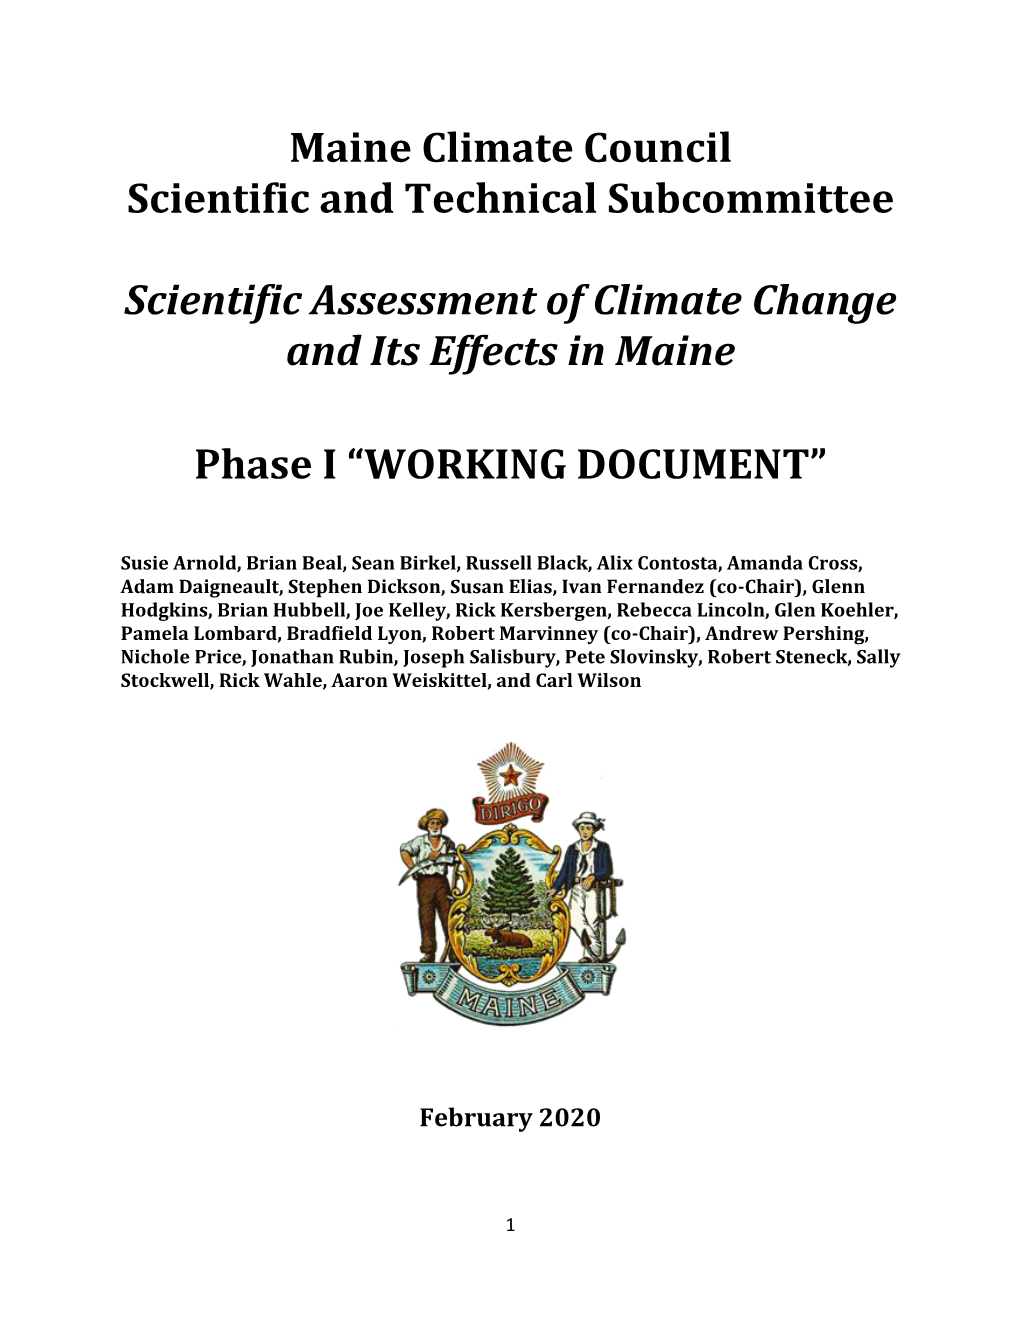 Scientific Assessment of Climate Change and Its Effects in Maine